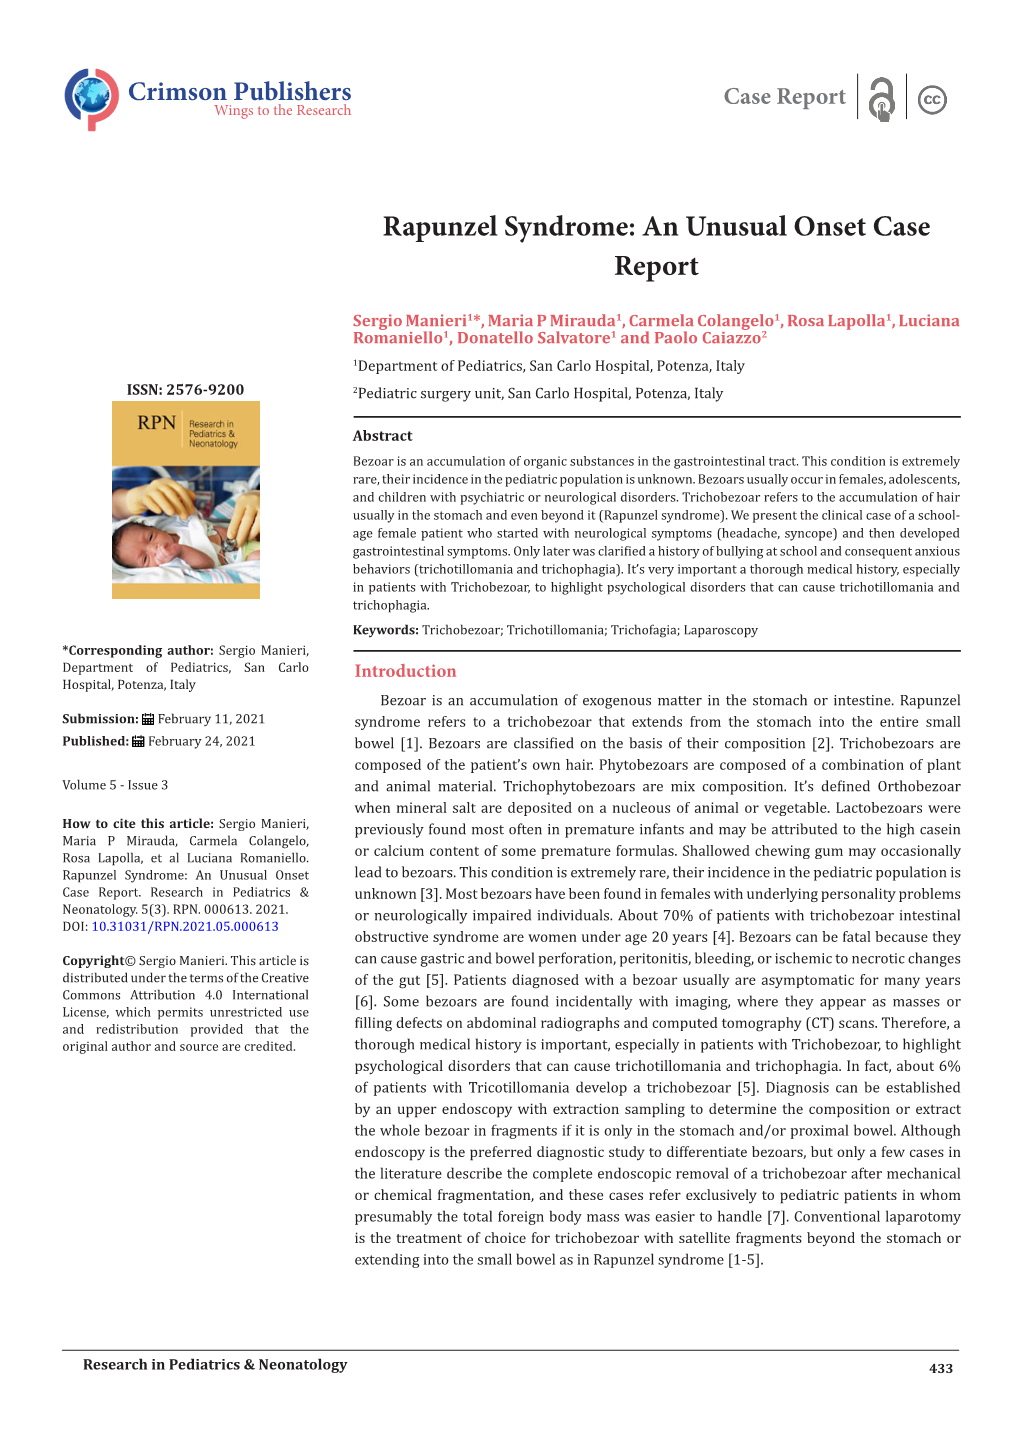 Rapunzel Syndrome: an Unusual Onset Case Report